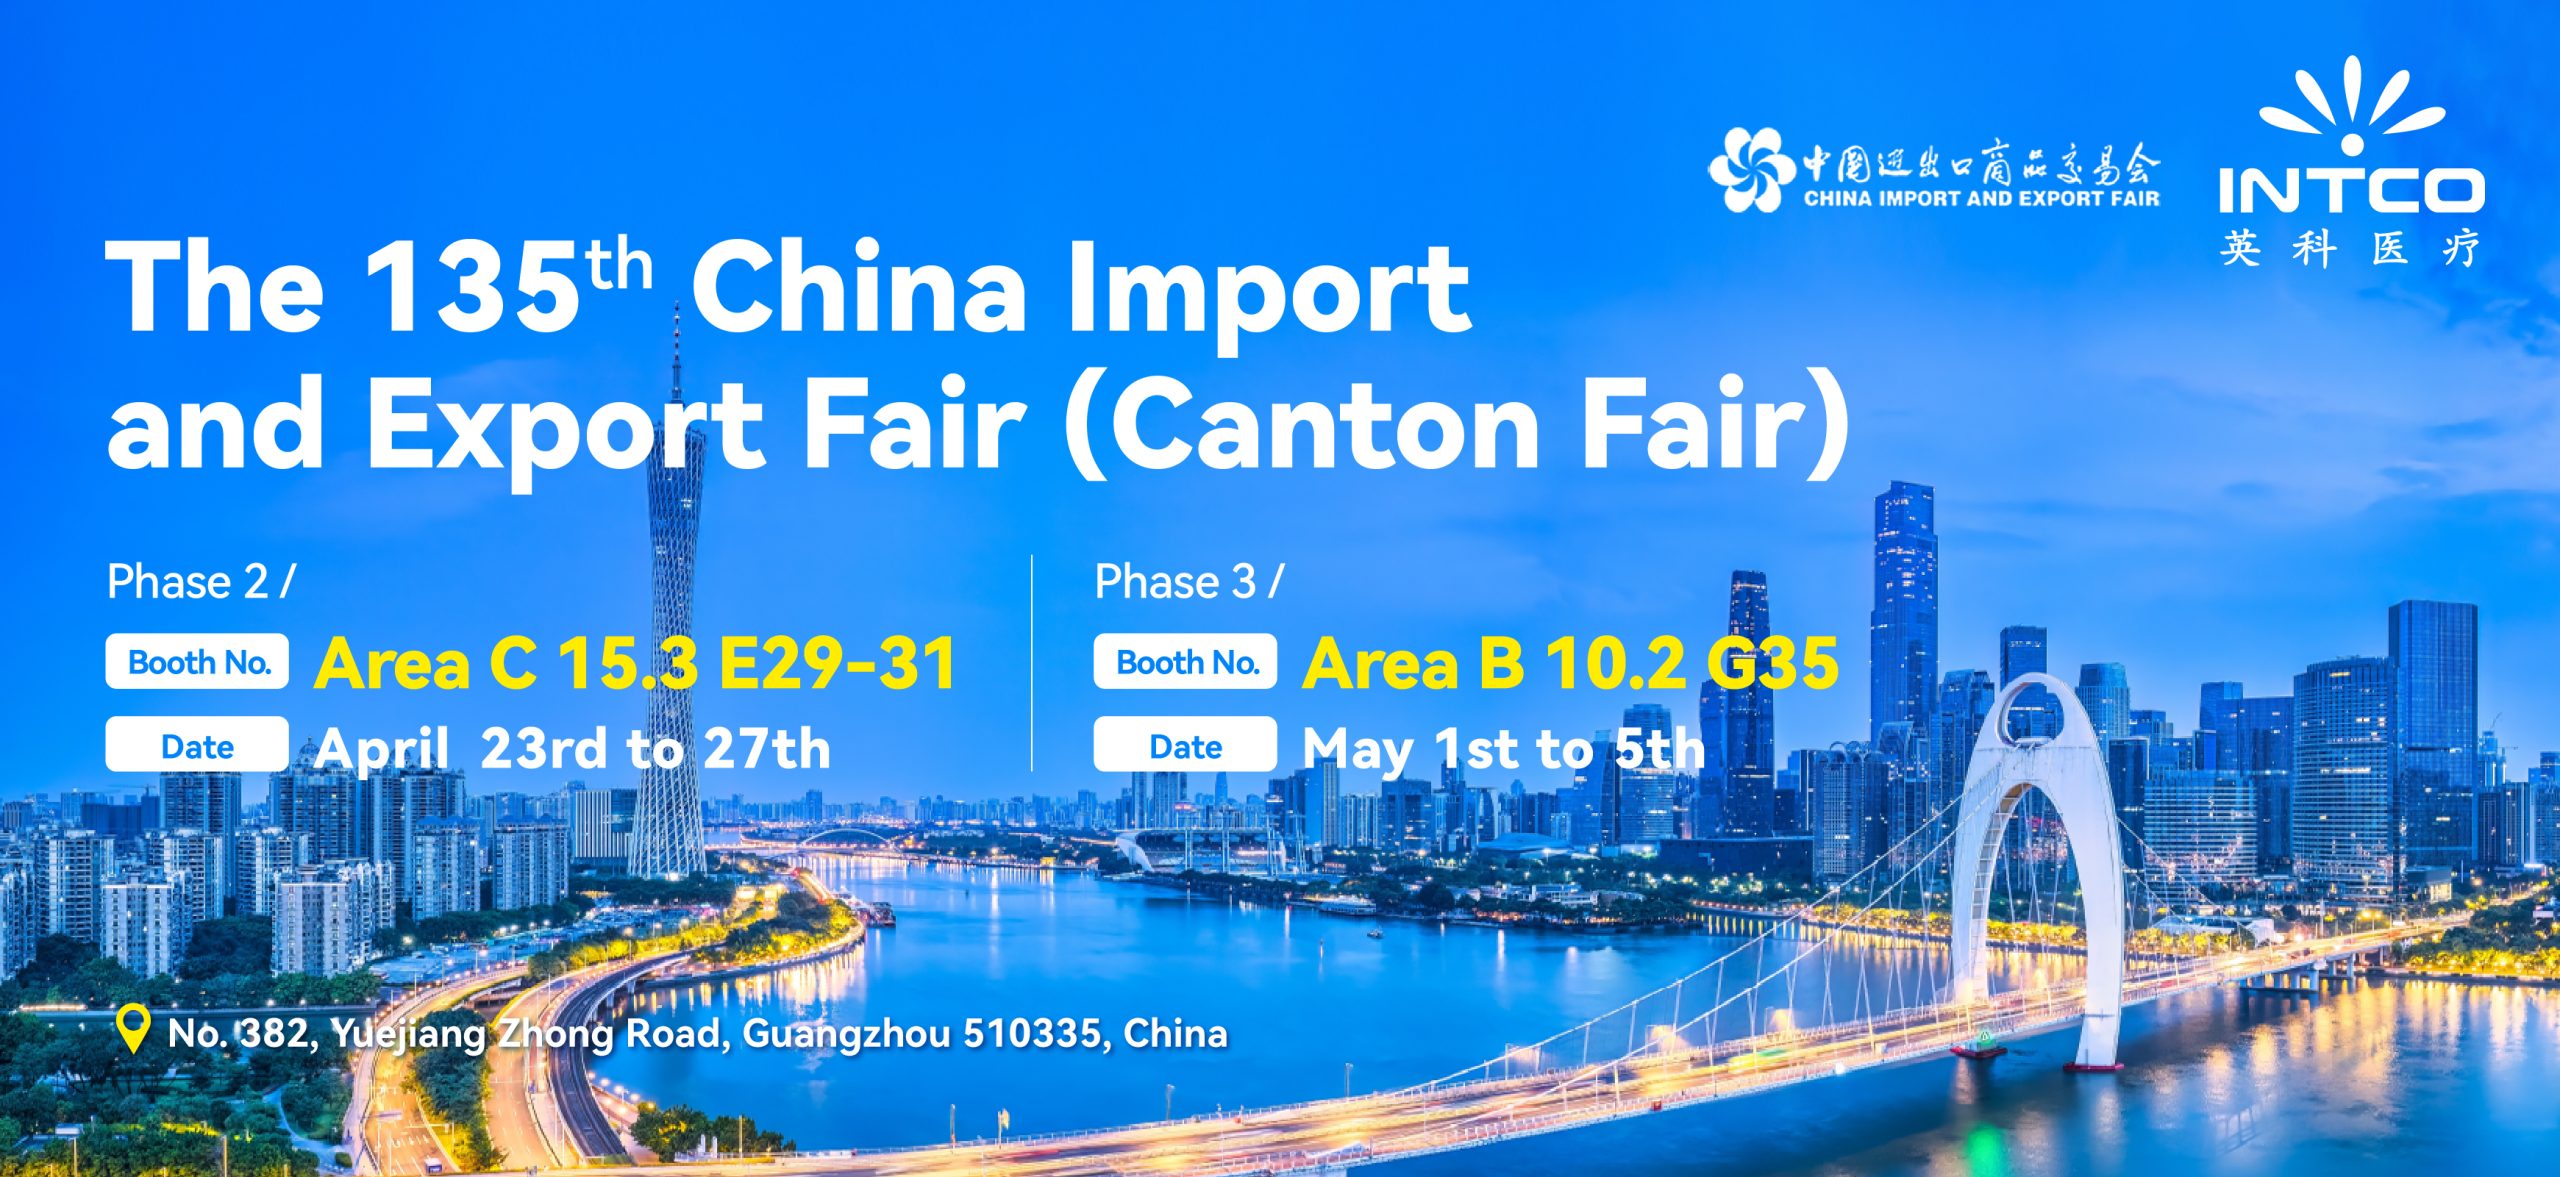 The 135th China Import and Export Fair (Canton Fair)